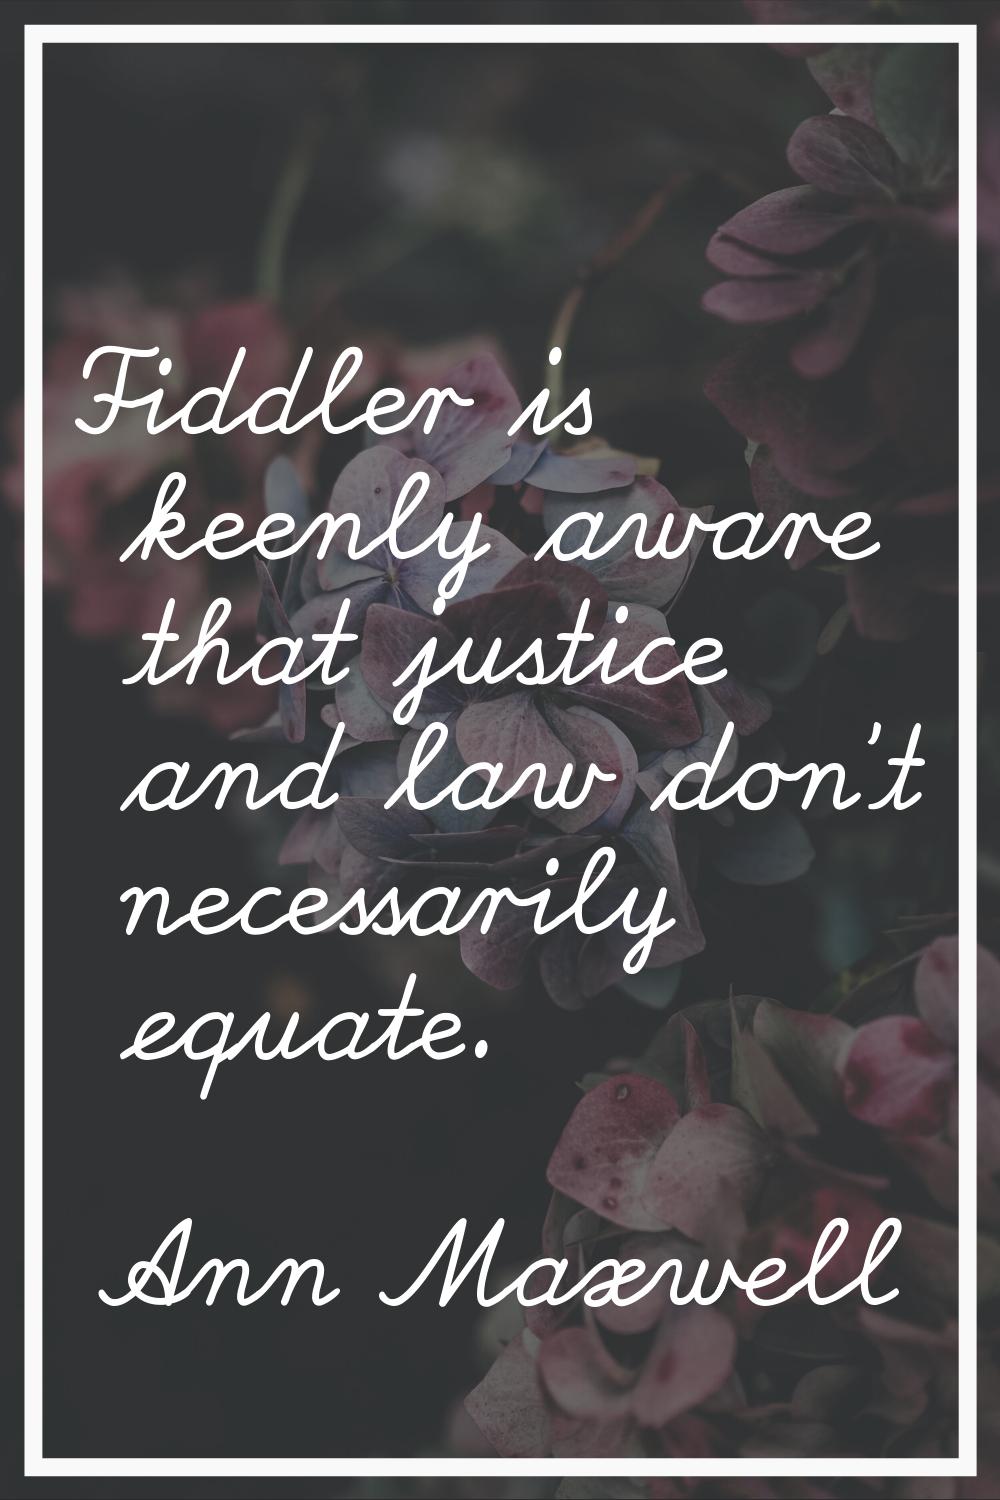 Fiddler is keenly aware that justice and law don't necessarily equate.